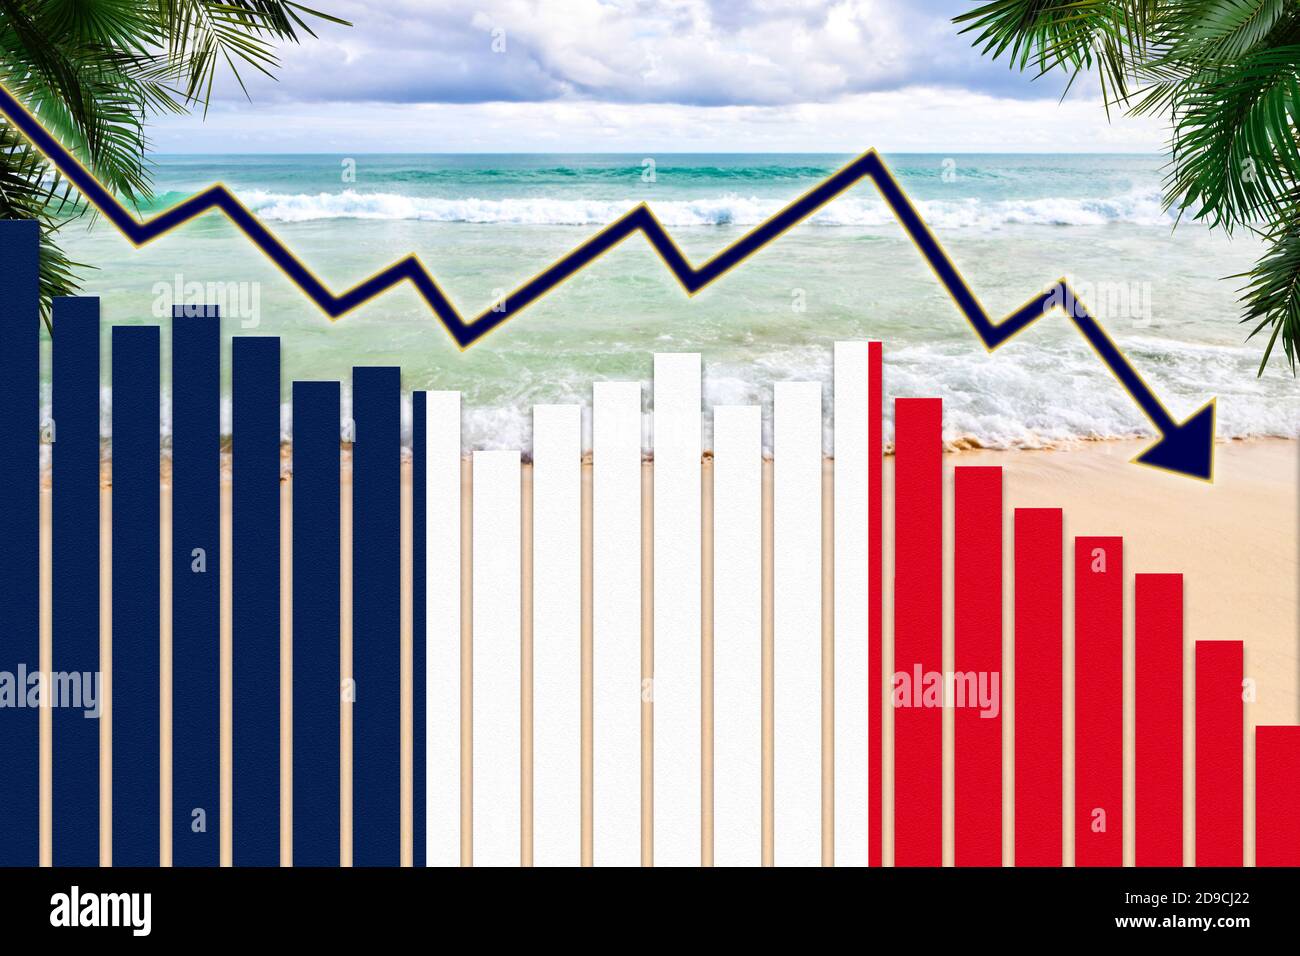 COVID-19 coronavirus pandemic impact on France tourism industry concept showing beach background with French flag on bar charts declining trend. Stock Photo